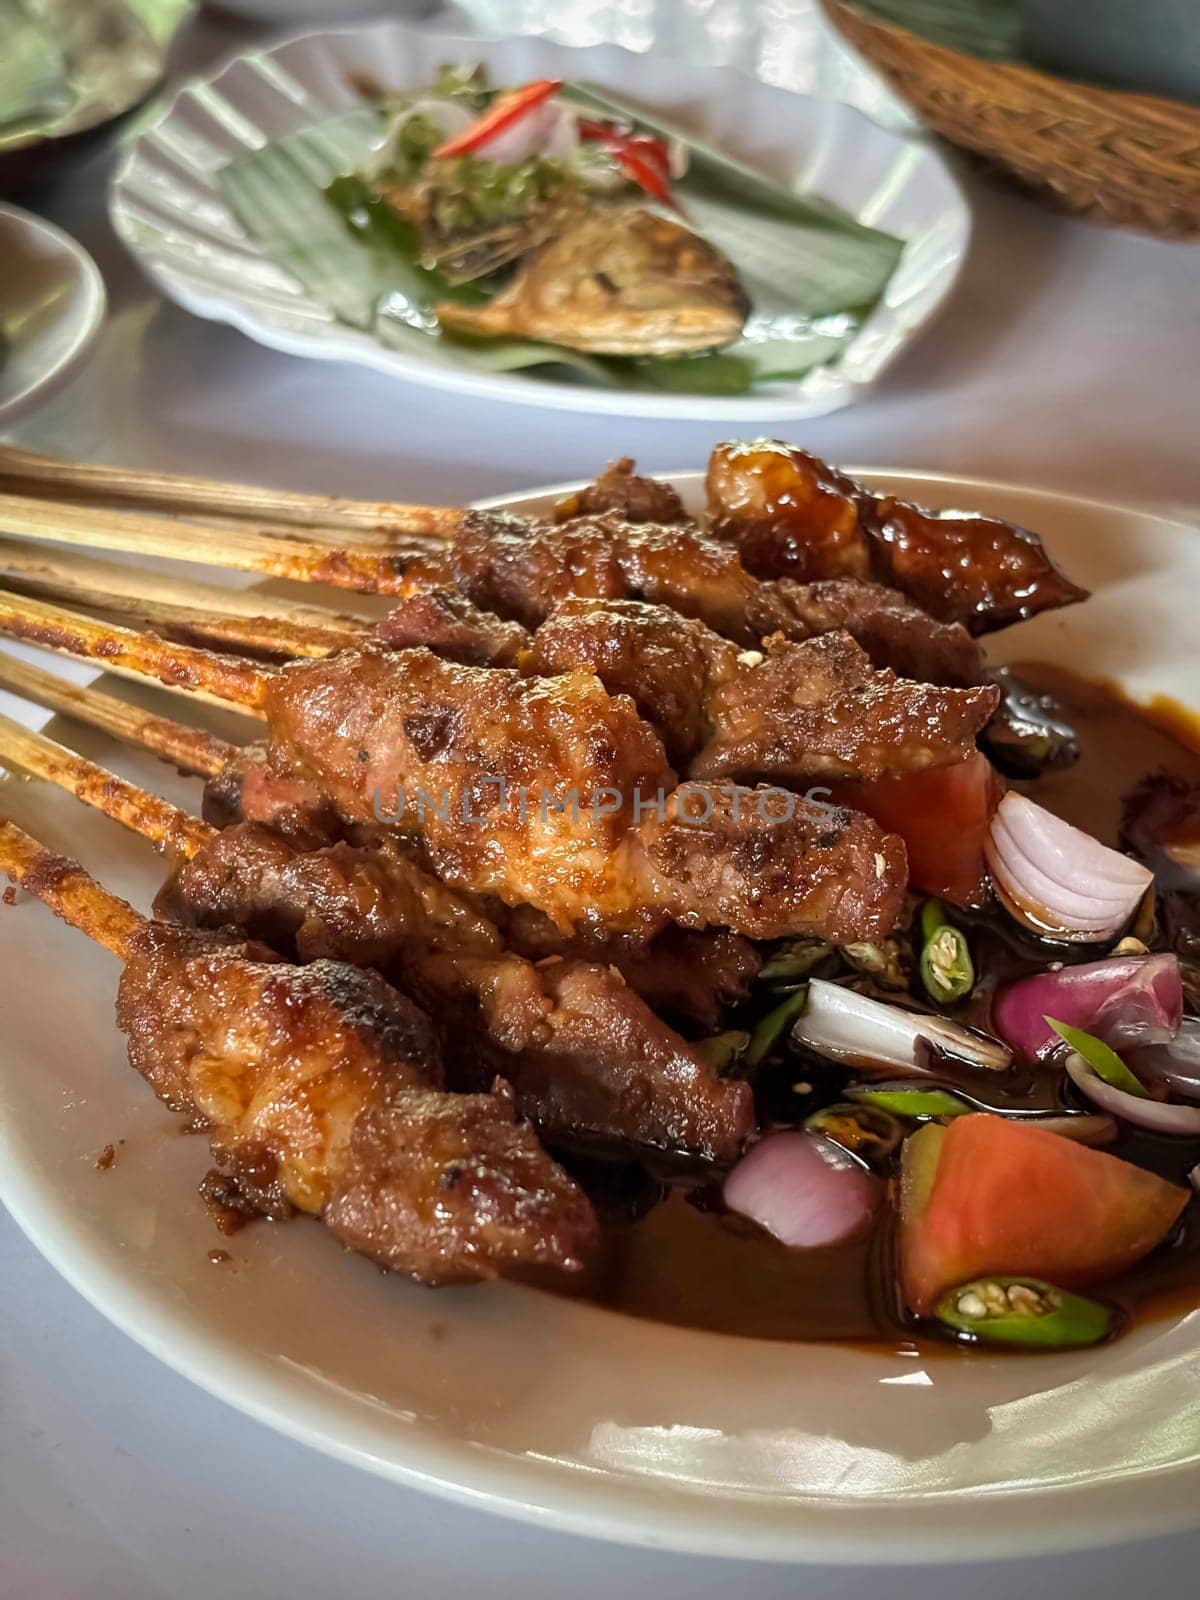 Lamb, mutton grilled skewer satay served with soy sauce sauce with sliced shallots, tomatoes, cucumber and cayenne pepper served in white plate